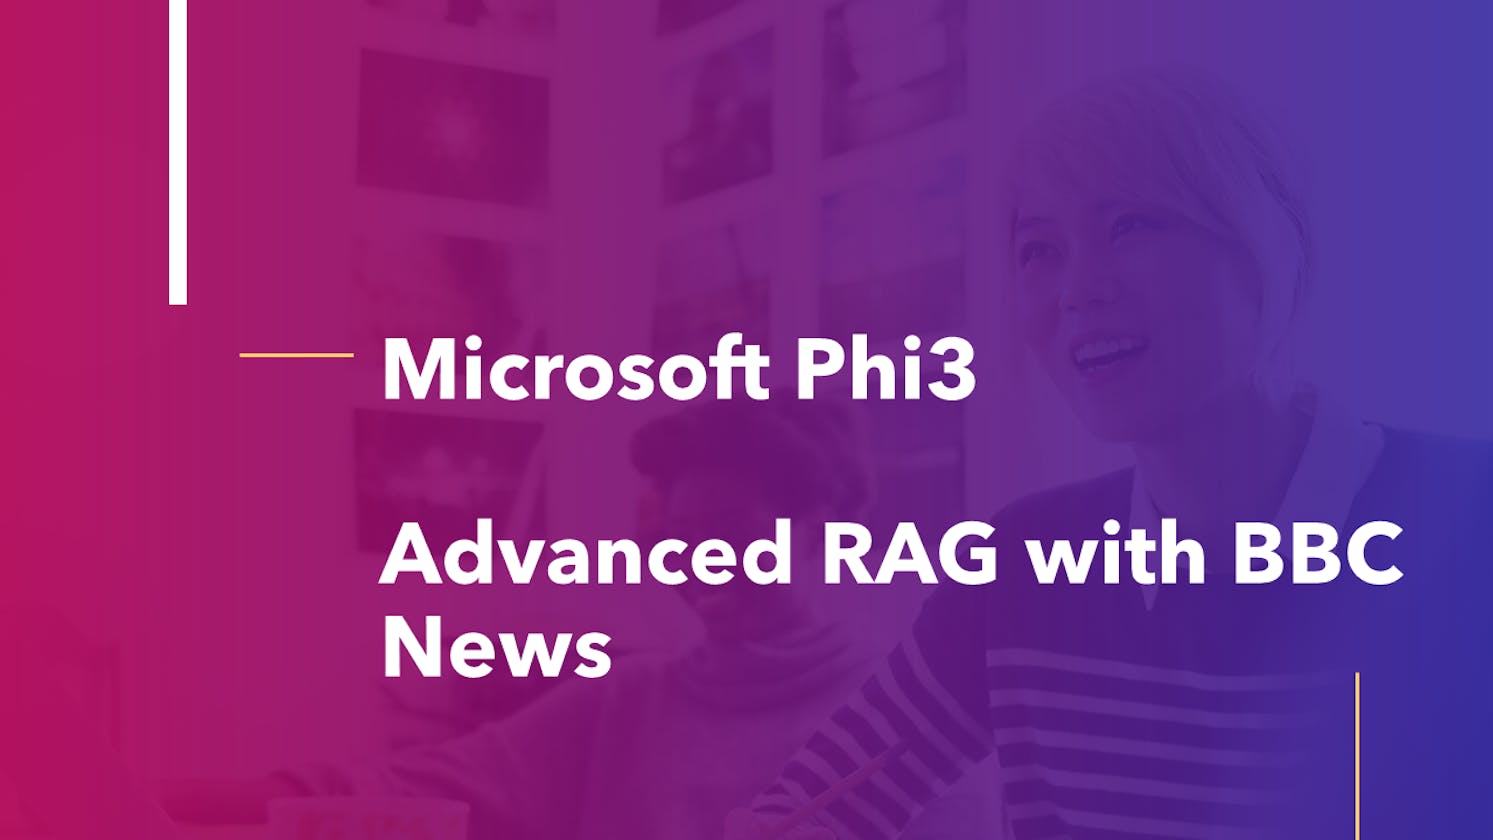 Understanding BBC News Q&A with Advanced RAG and Microsoft Phi3